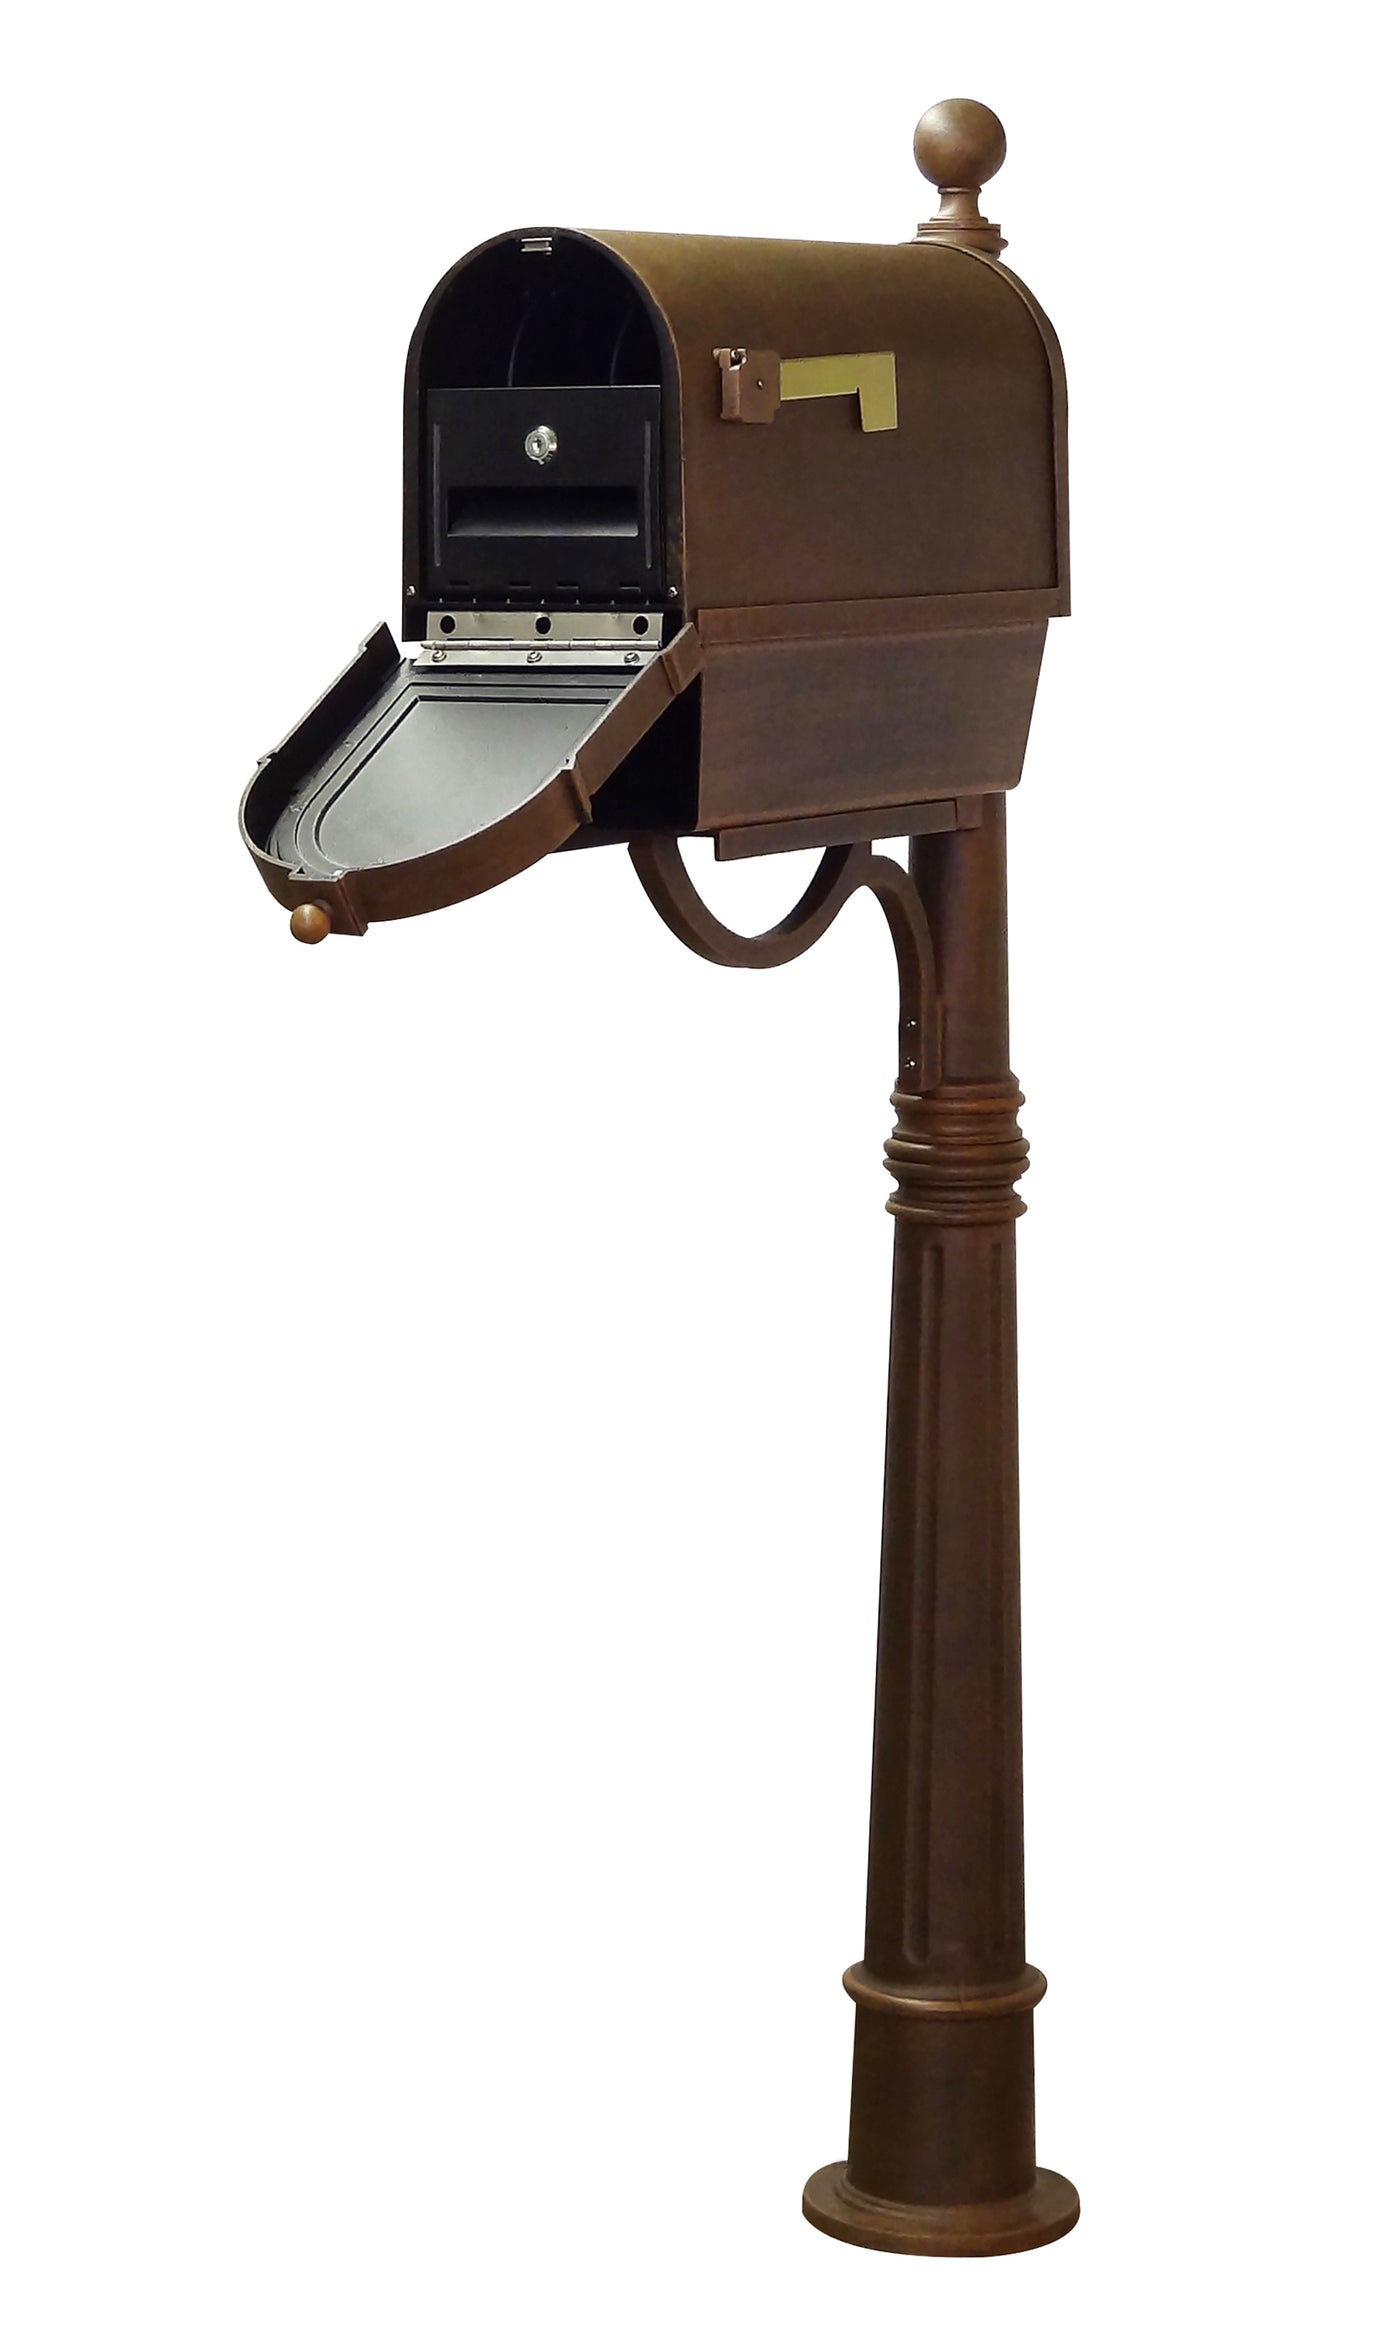 Berkshire Curbside Mailbox with Newspaper Tube, Locking Insert and Ashland Mailbox Post